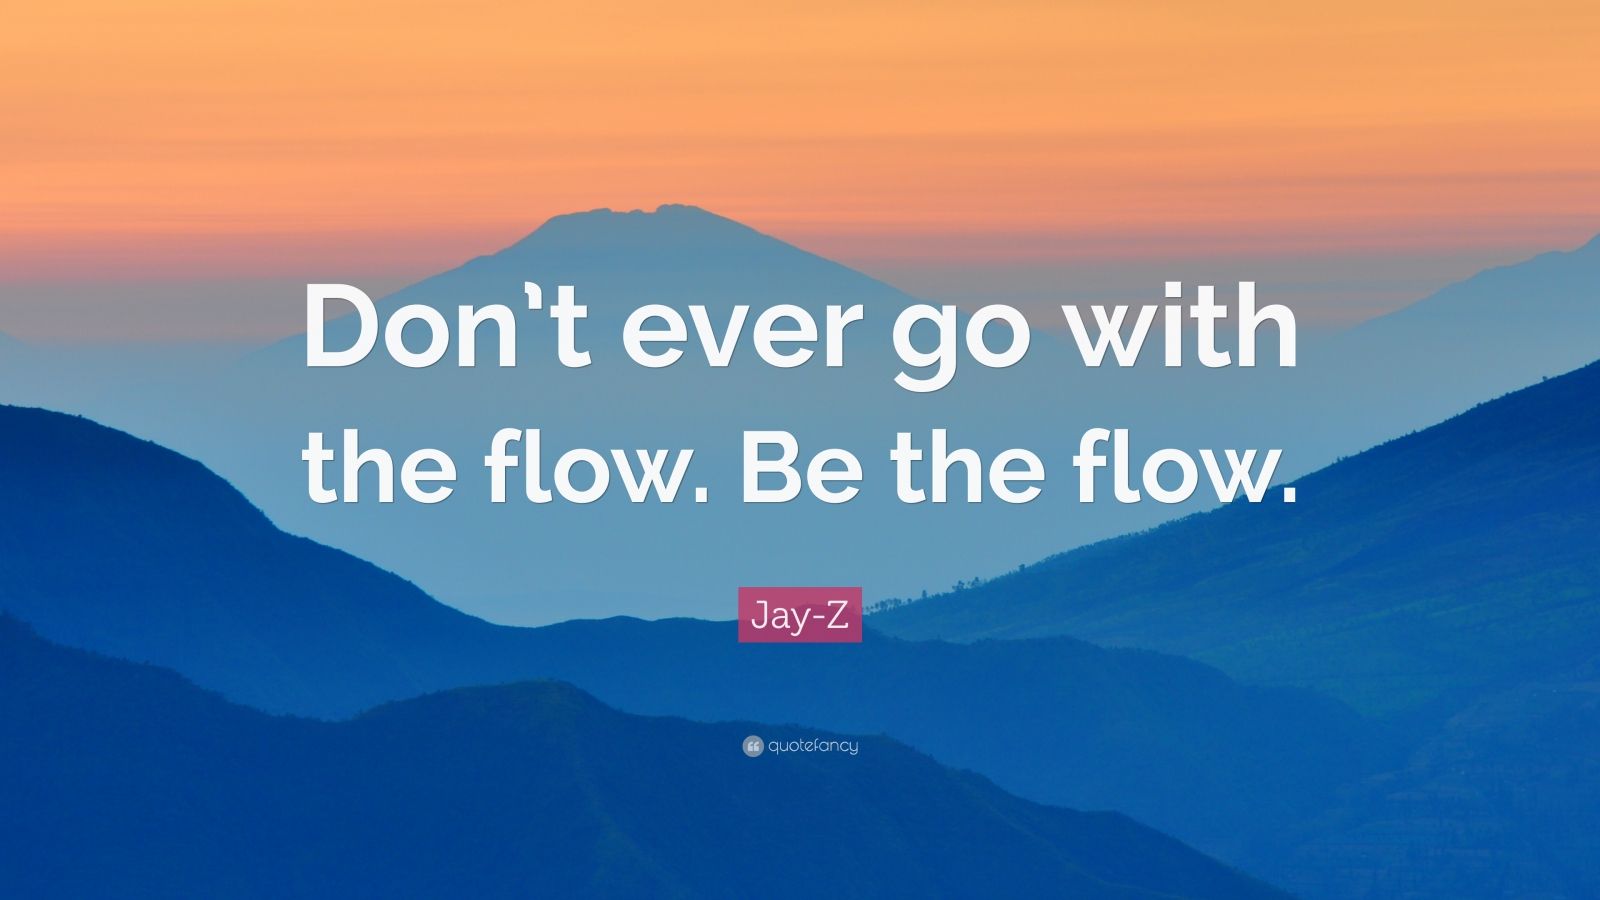 Jay-Z Quote: “Don’t ever go with the flow. Be the flow.” (9 wallpapers